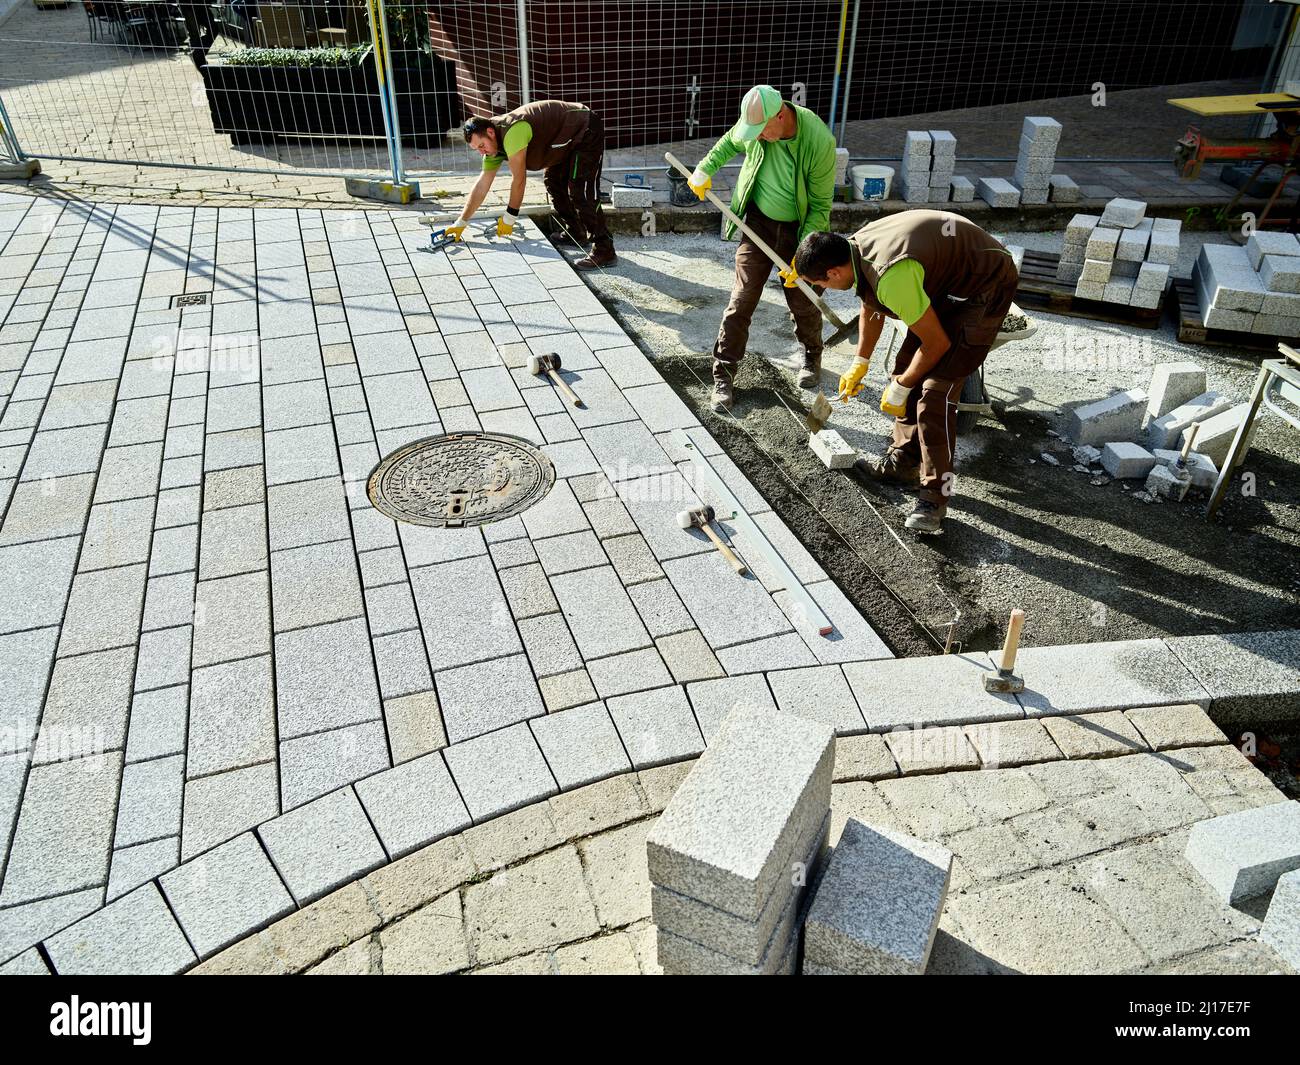 Pavers working on footpath to install paving stones Stock Photo